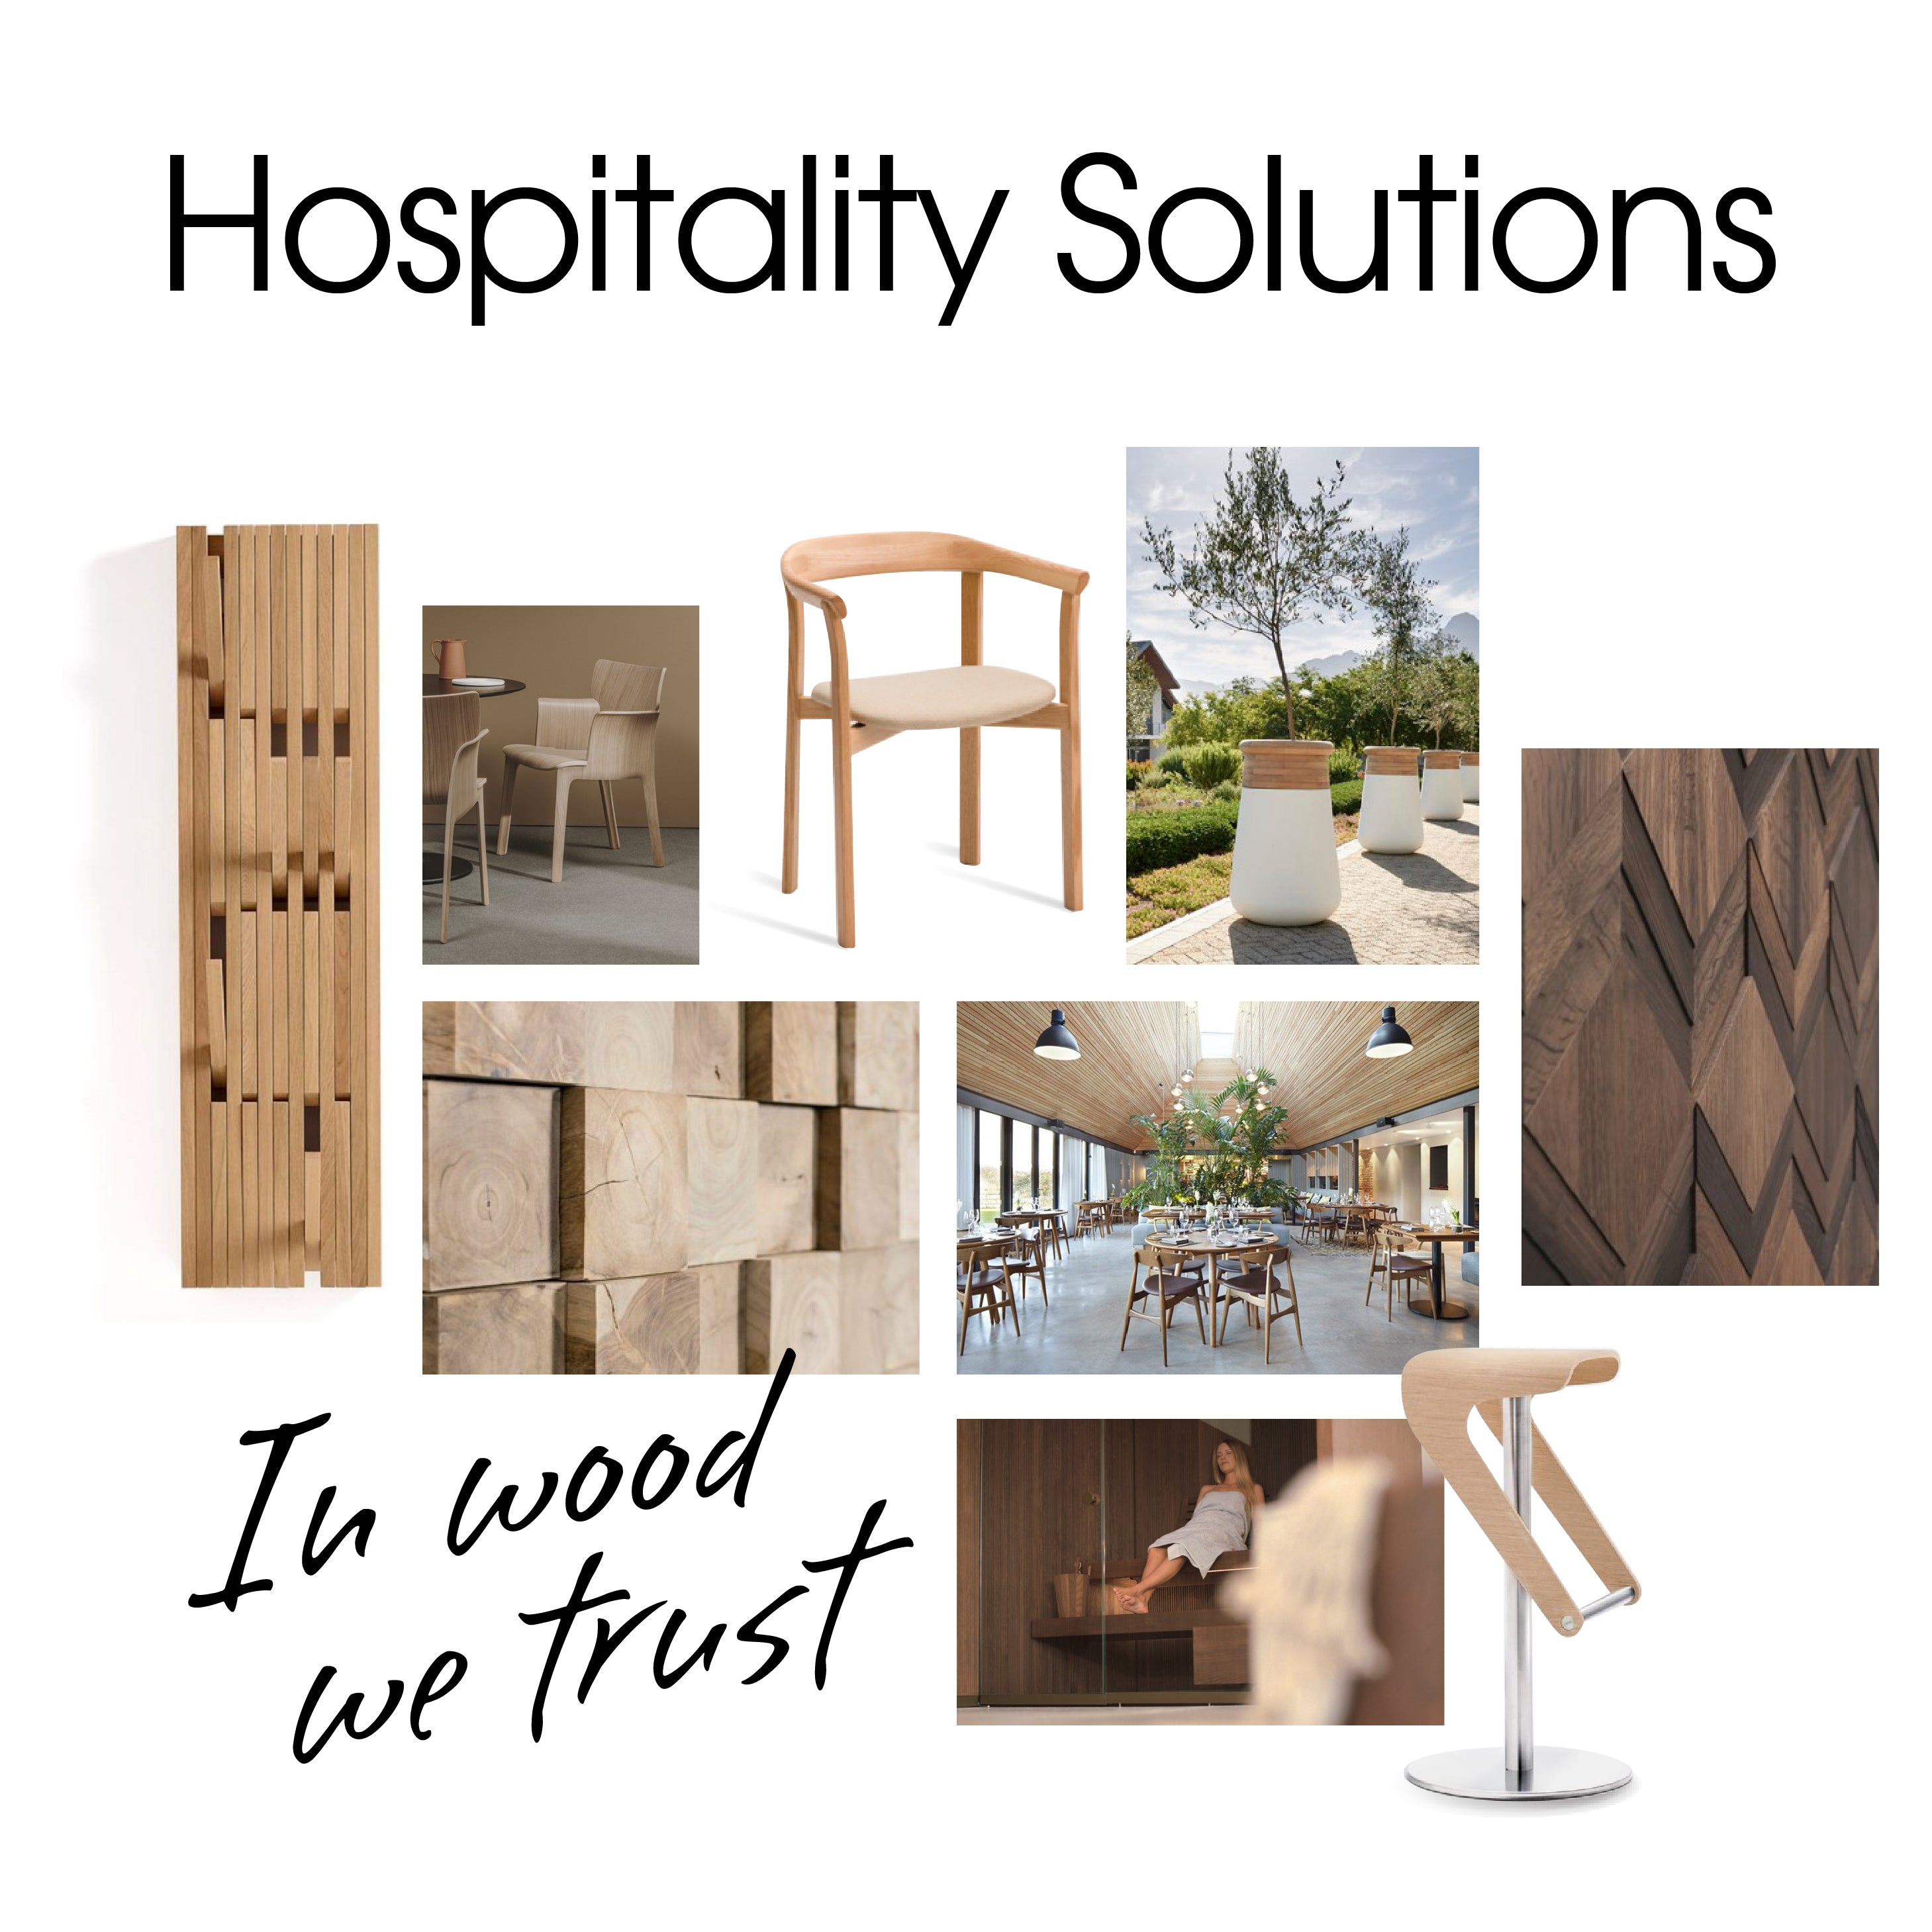 HOSPITALITY SOLUTIONS | IN WOOD WE TRUST